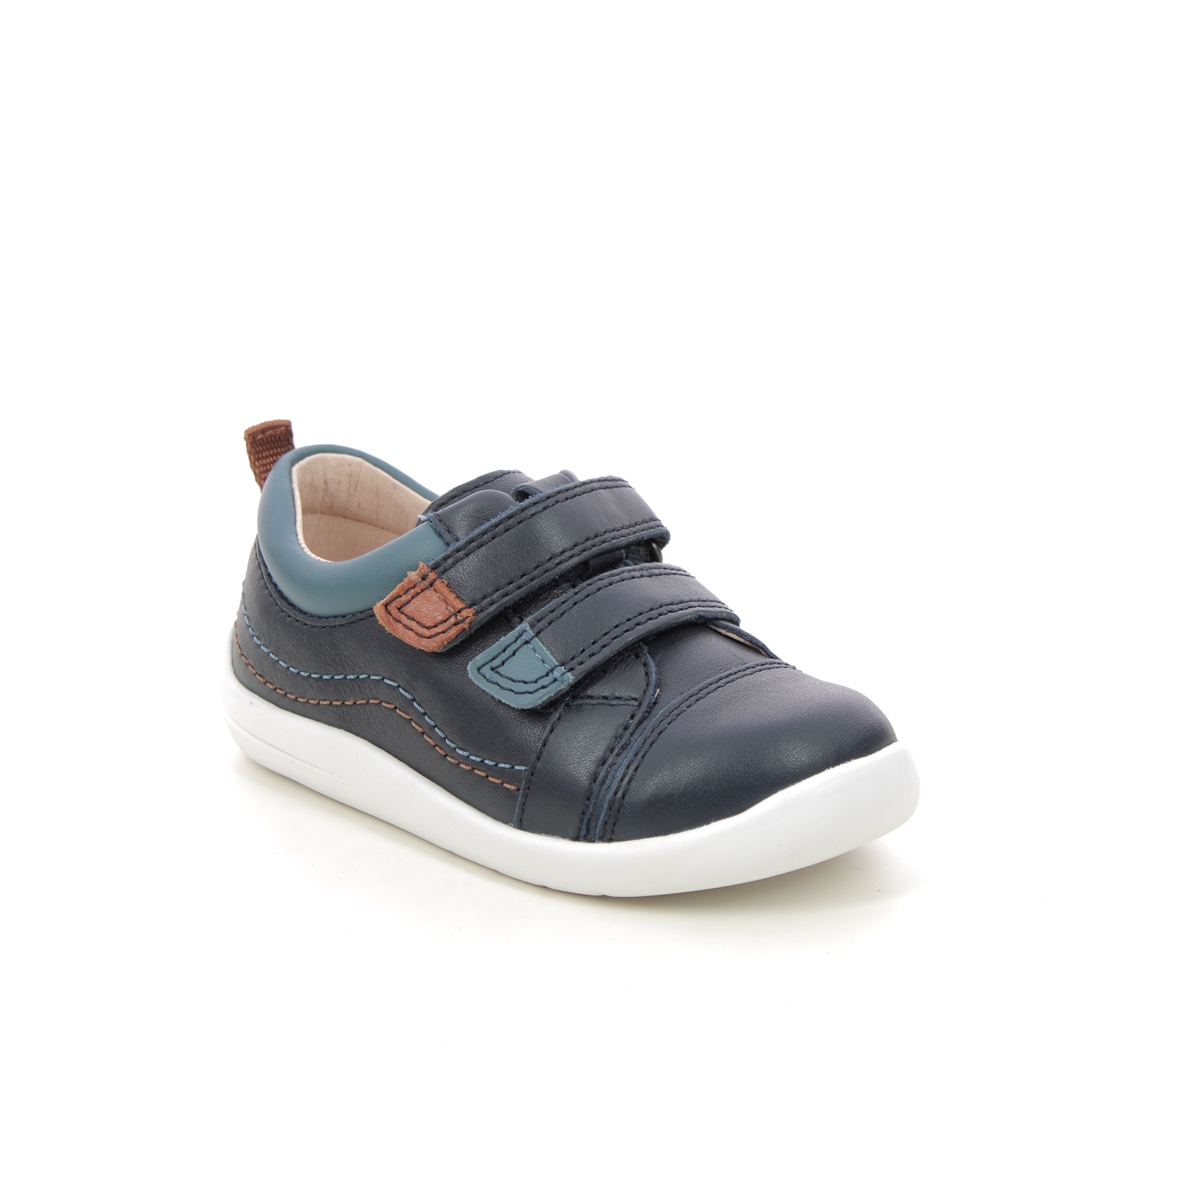 Start Rite Clubhouse Jojo Navy Leather Kids Boys Toddler Shoes 0800-96F in a Plain Leather in Size 7